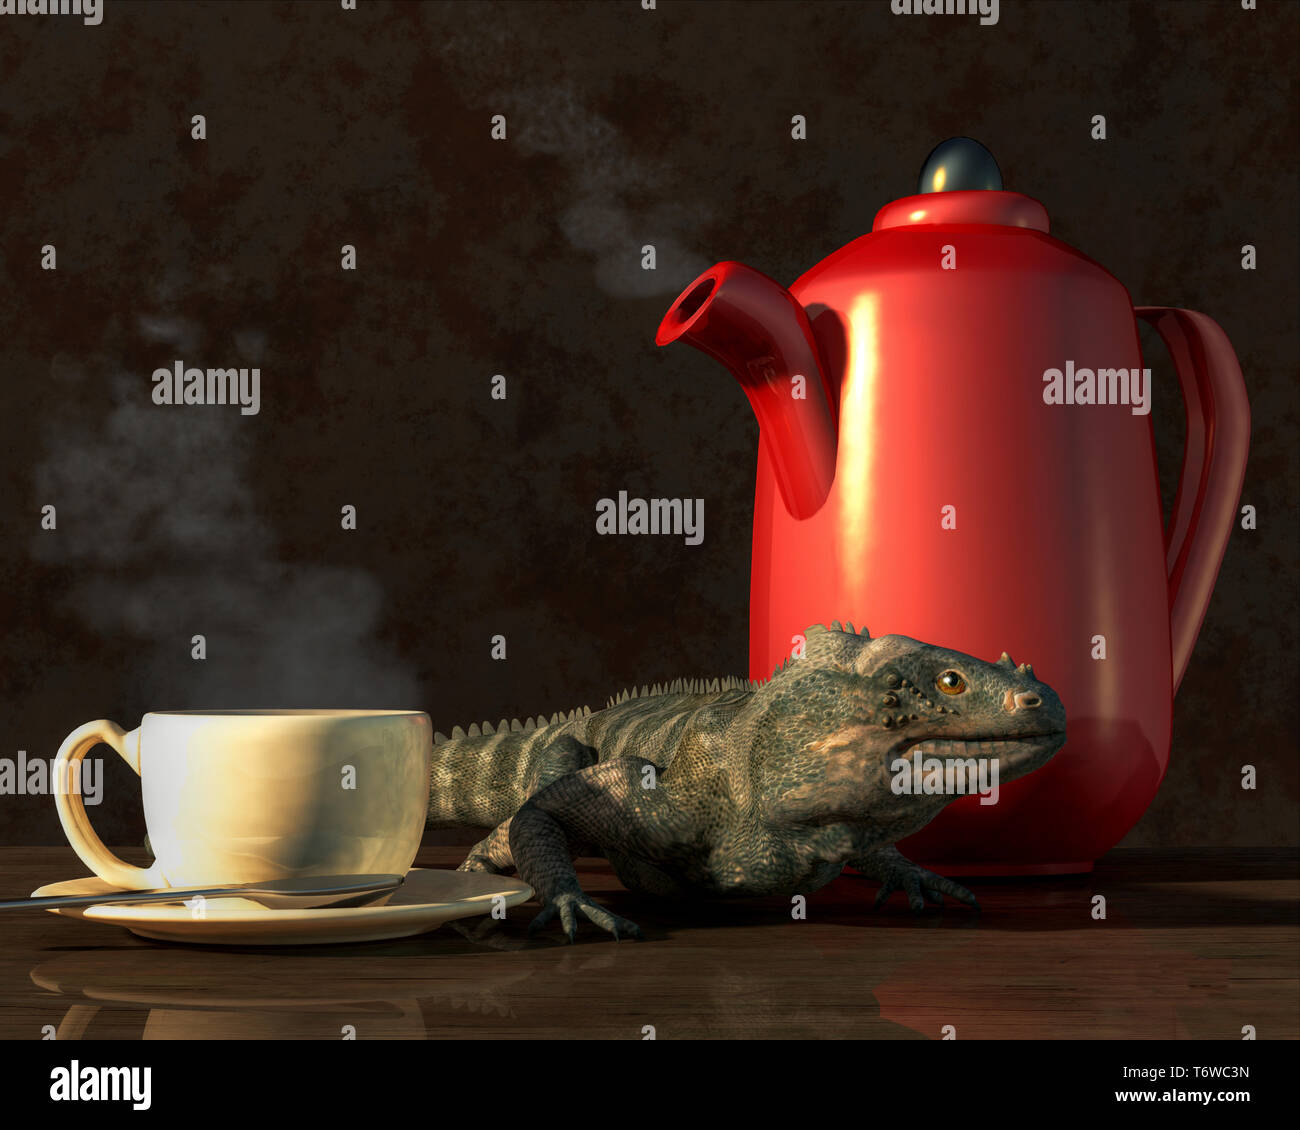 A small iguana sits on a table between a steaming cup of coffee and a bright red coffee pot.  All three things are reflected in table surface. Stock Photo